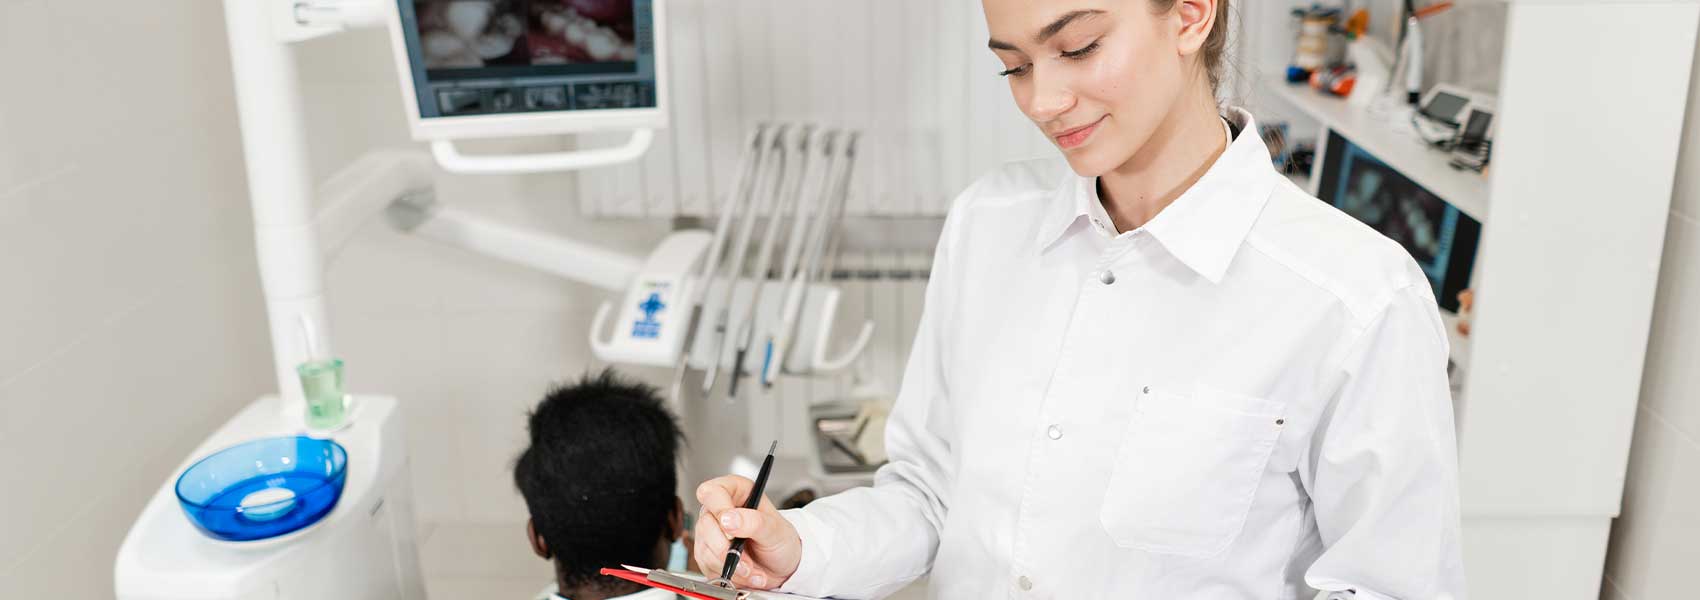 Lady dentist filling a new patient form